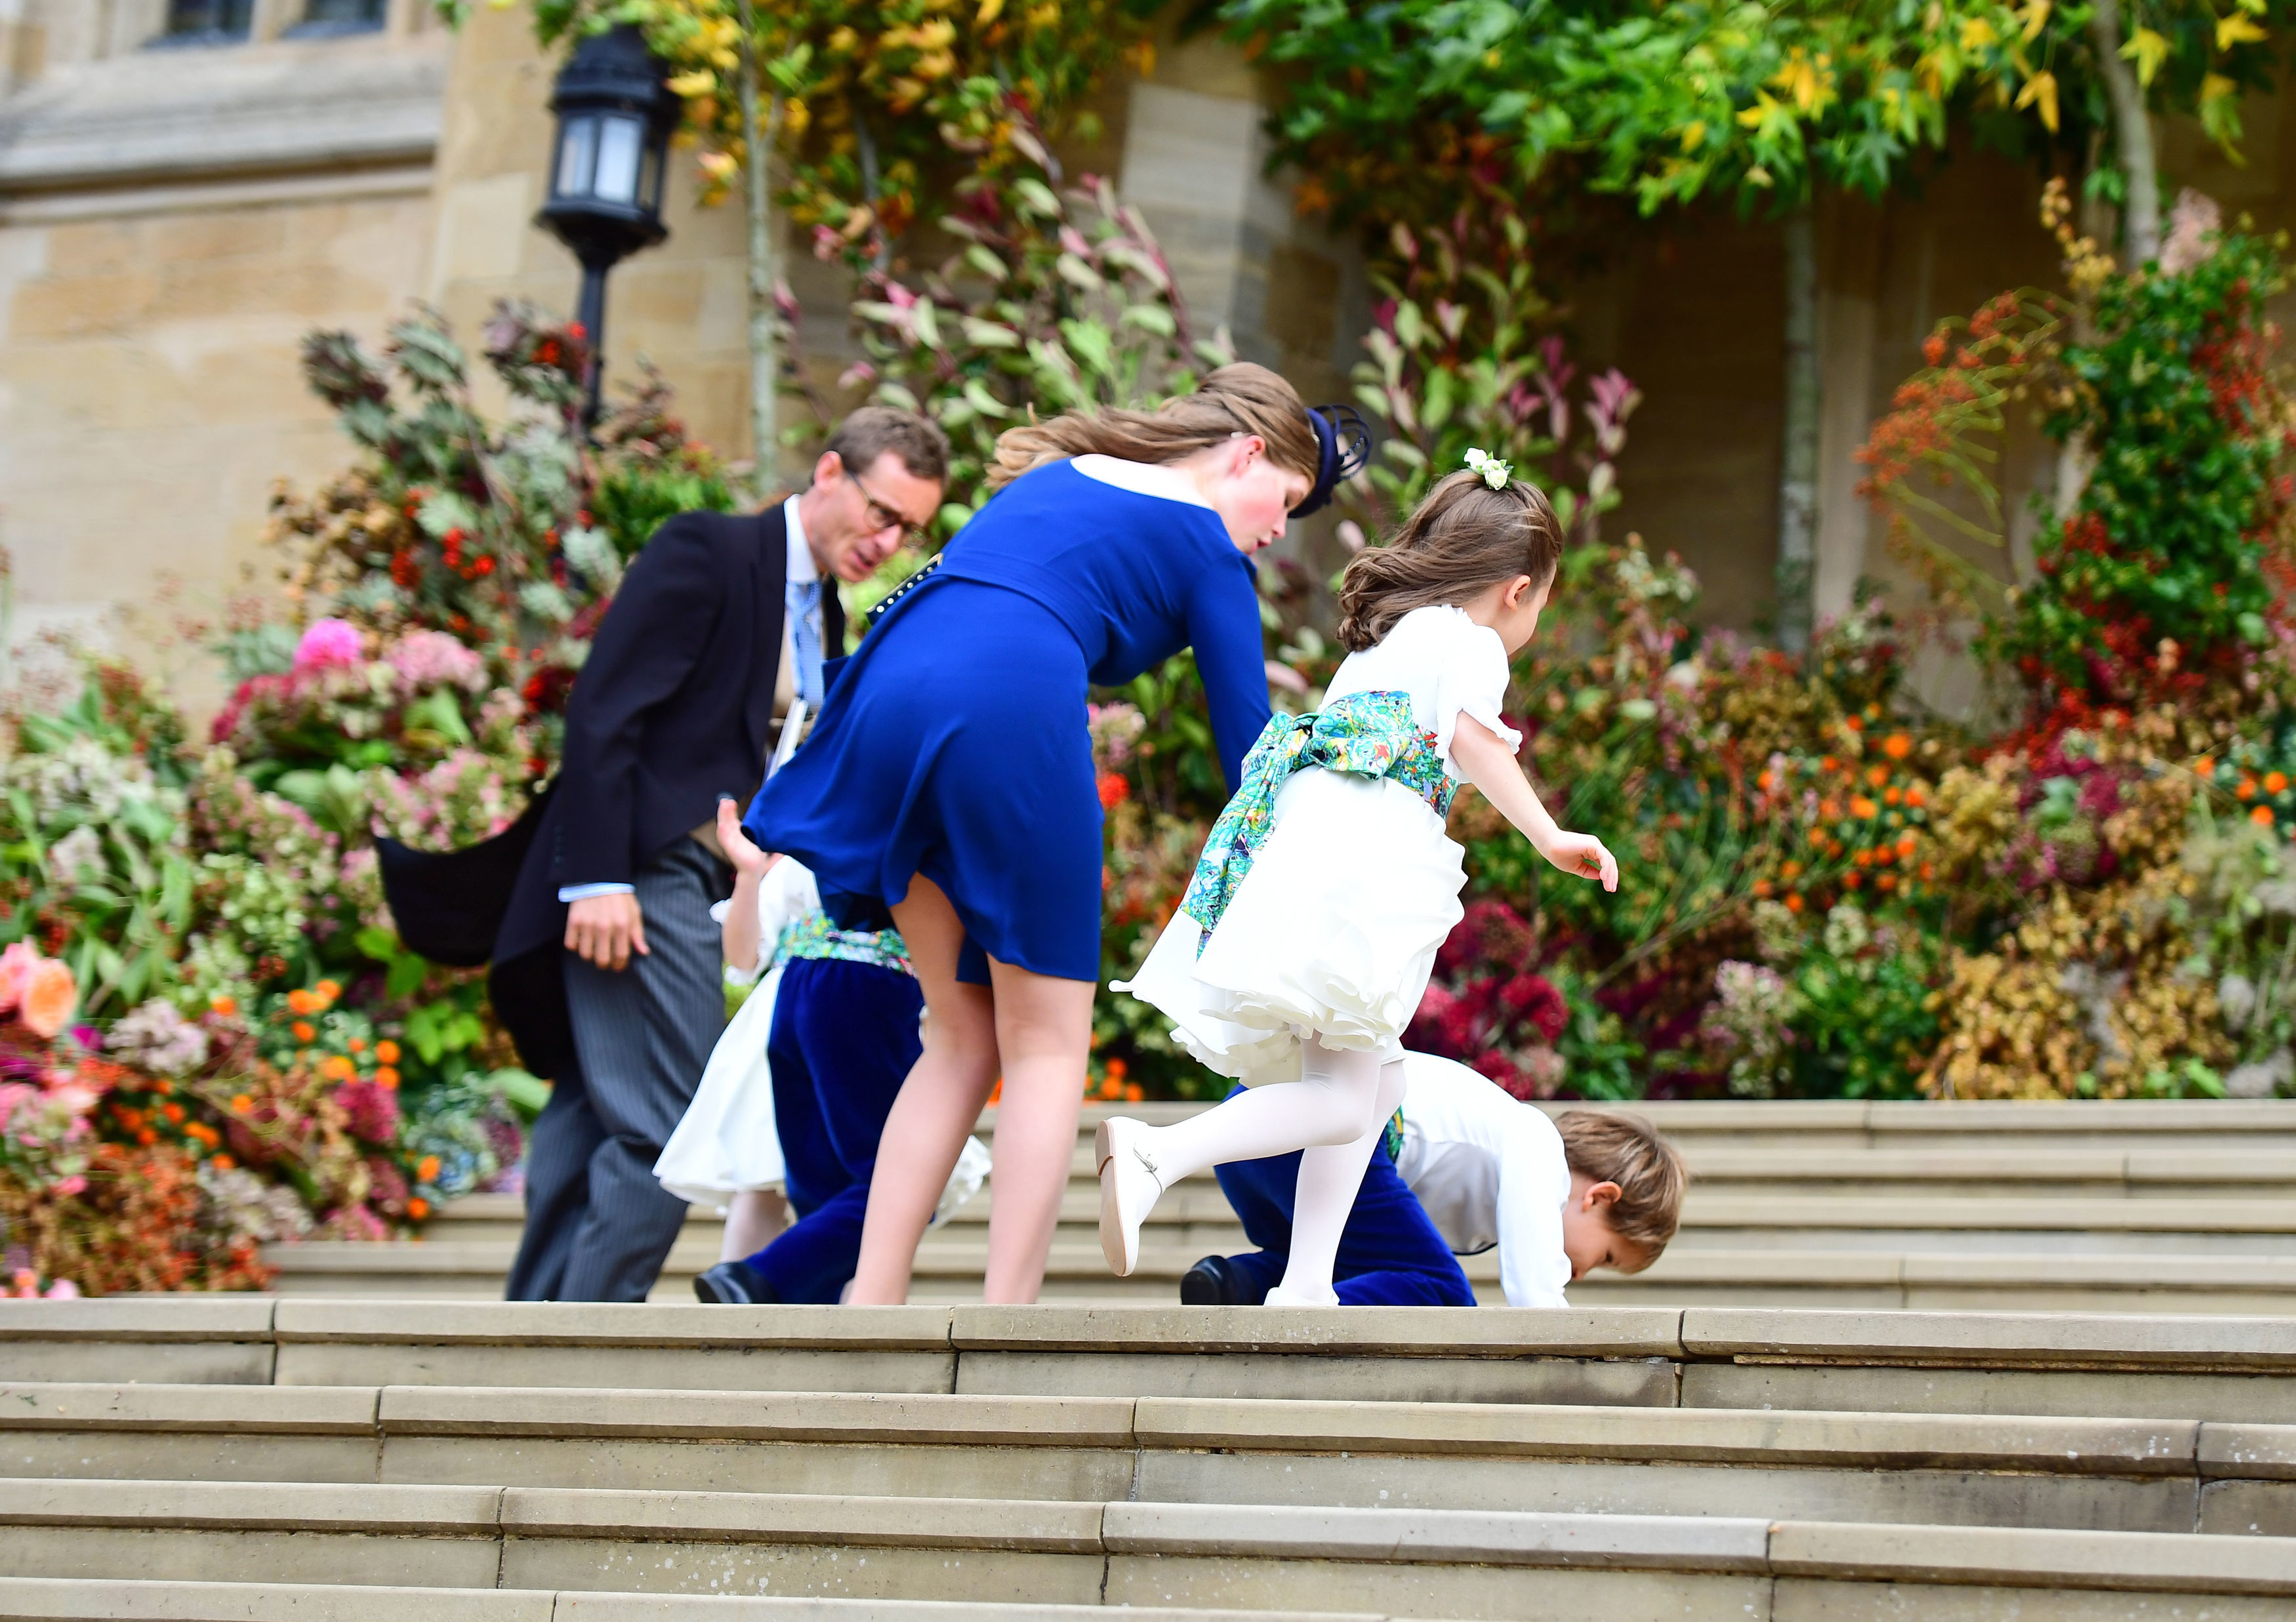 OCT 12: Pageboy Louis de Givenchy falls on the West Steps, as the bridesmaids and page boys arrive to attend the wedding of Princess Eugenie (VICTORIA JONES—AFP/Getty Images)